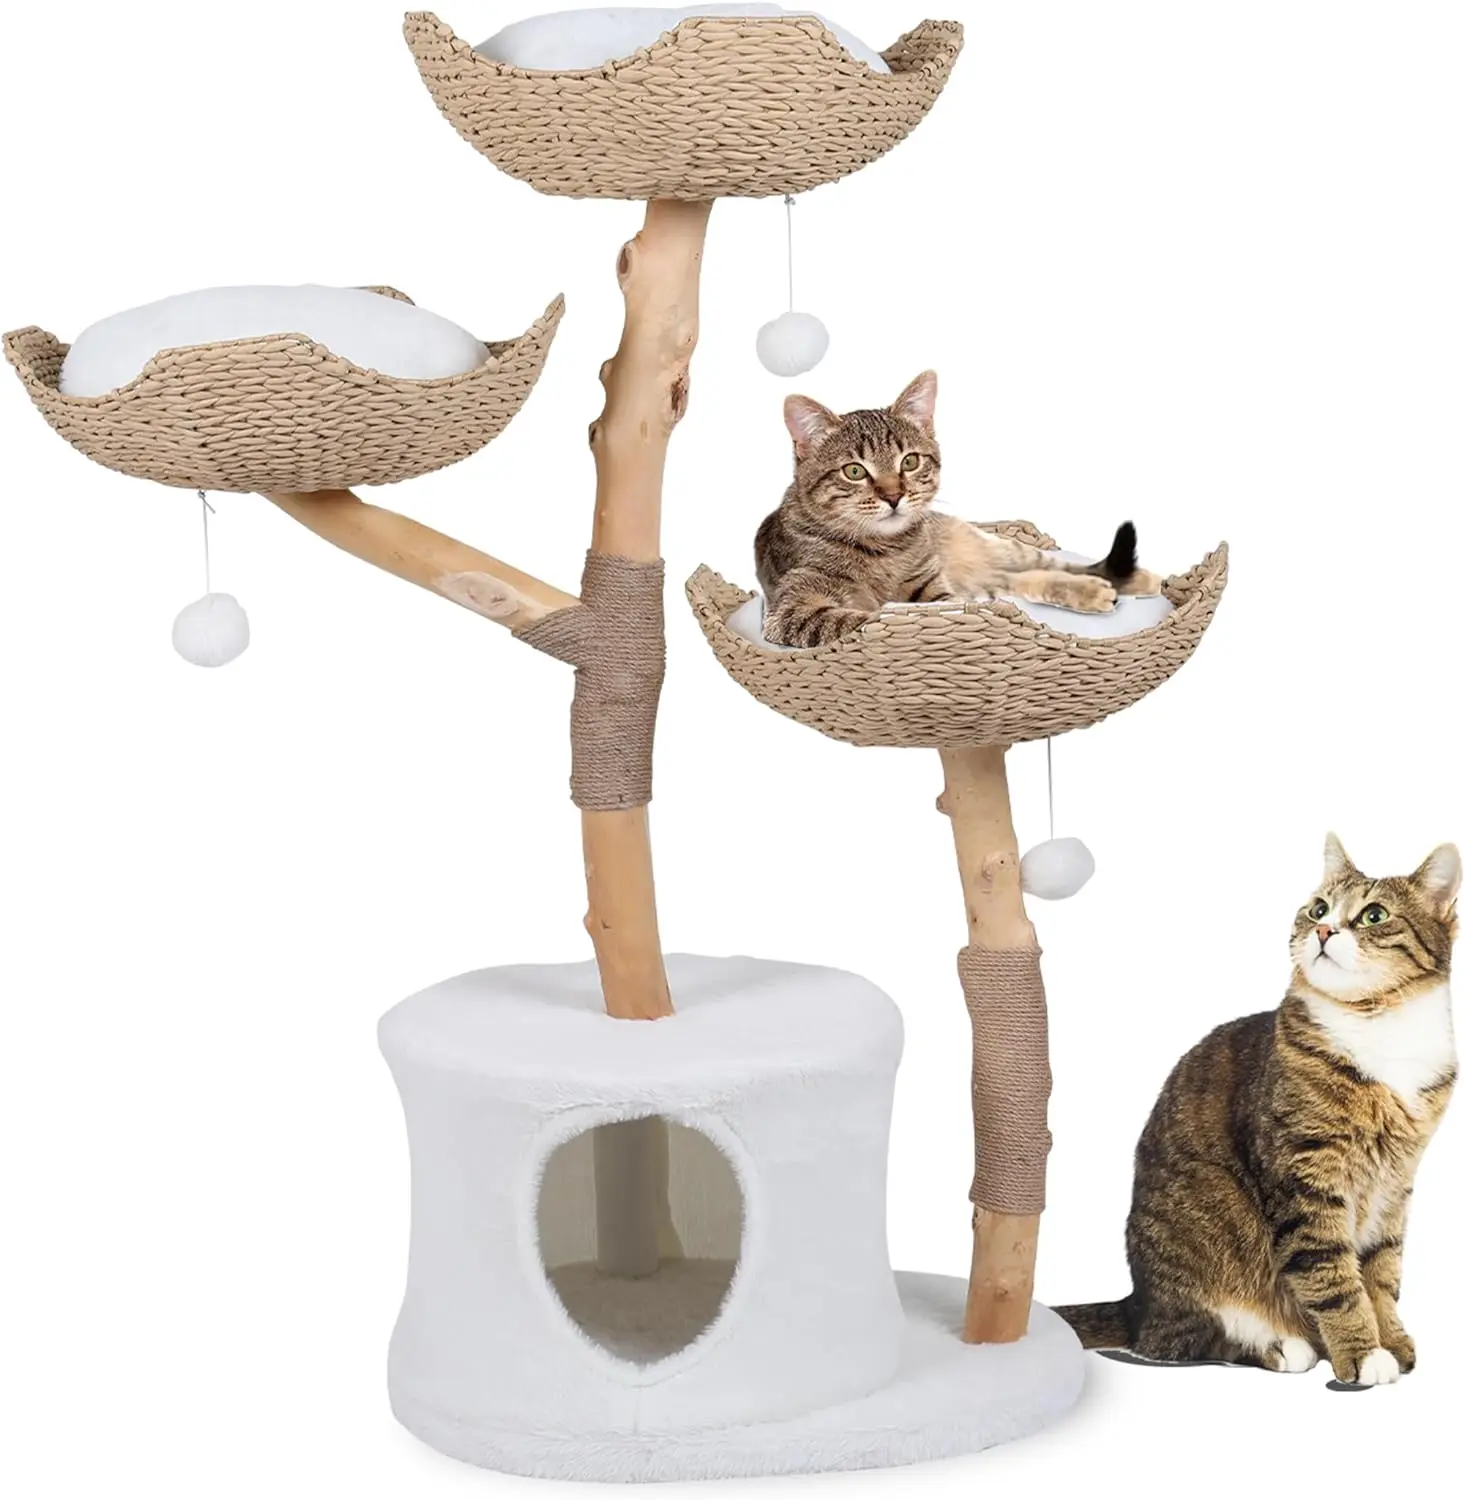 

Modern indoor multi-level tree, solid wood tower, luxury climbing, anti-scratch rope with pom poms, bed,